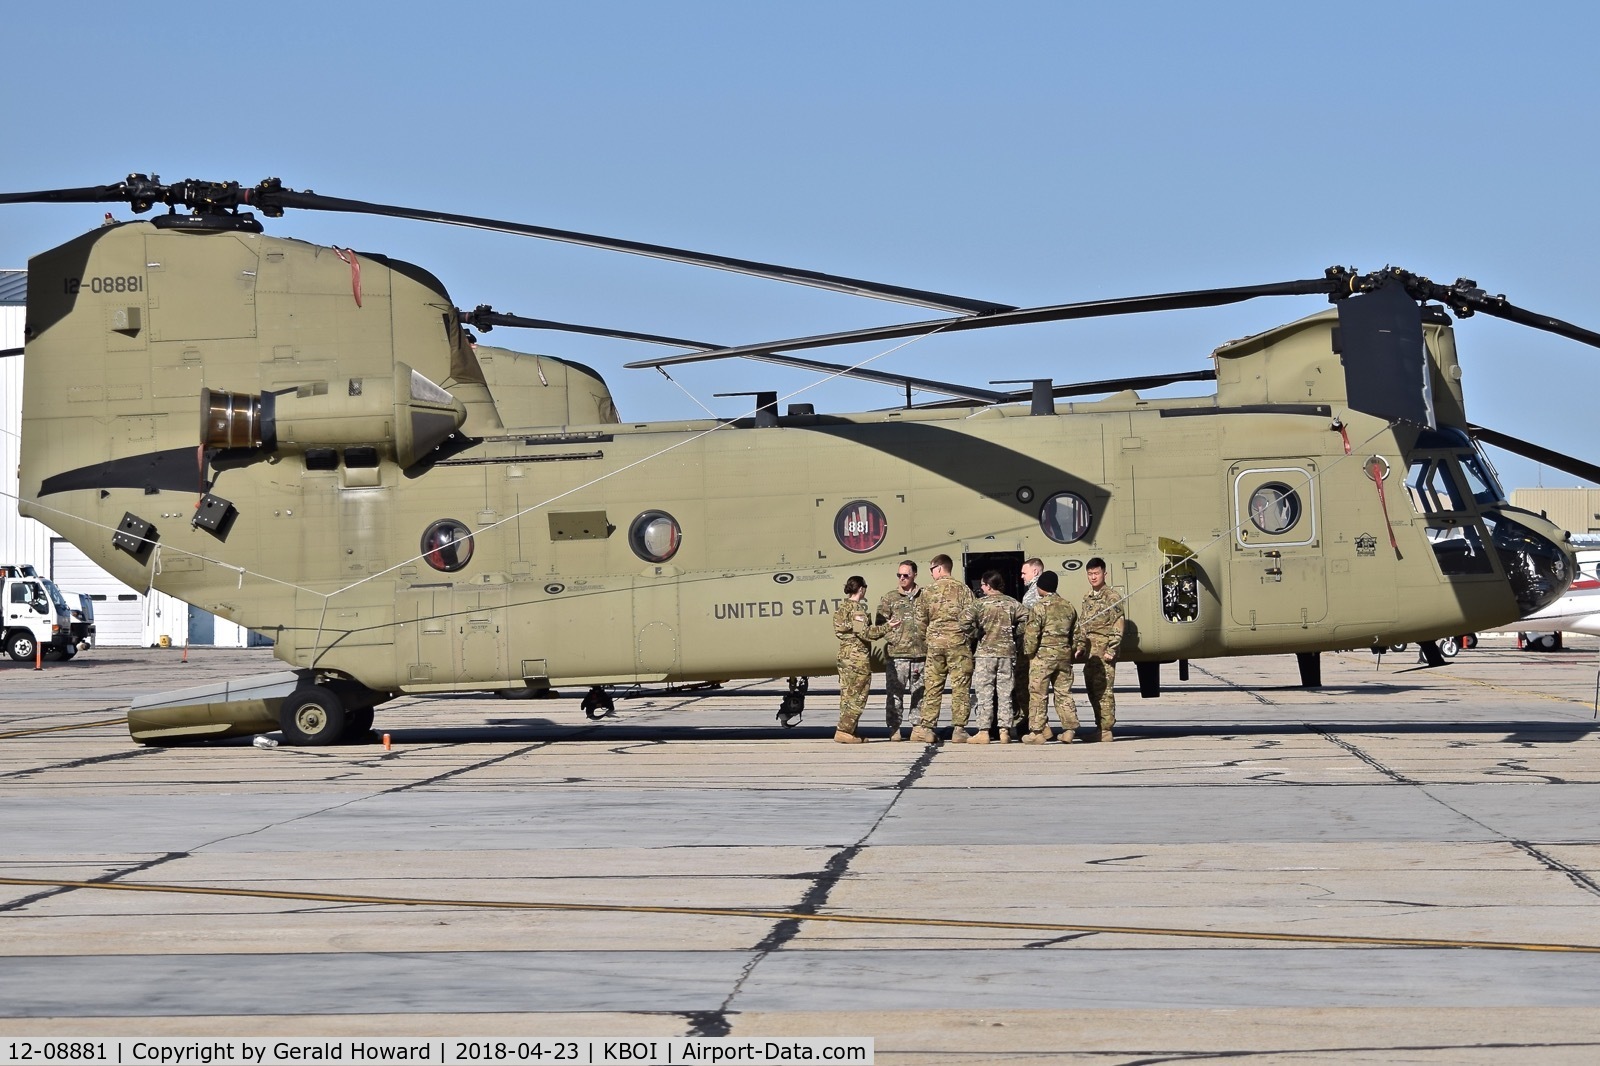 12-08881, 2012 Boeing CH-47F Chinook C/N M8881, Parked on the south GA ramp. B Co. 1-124 GSAB.